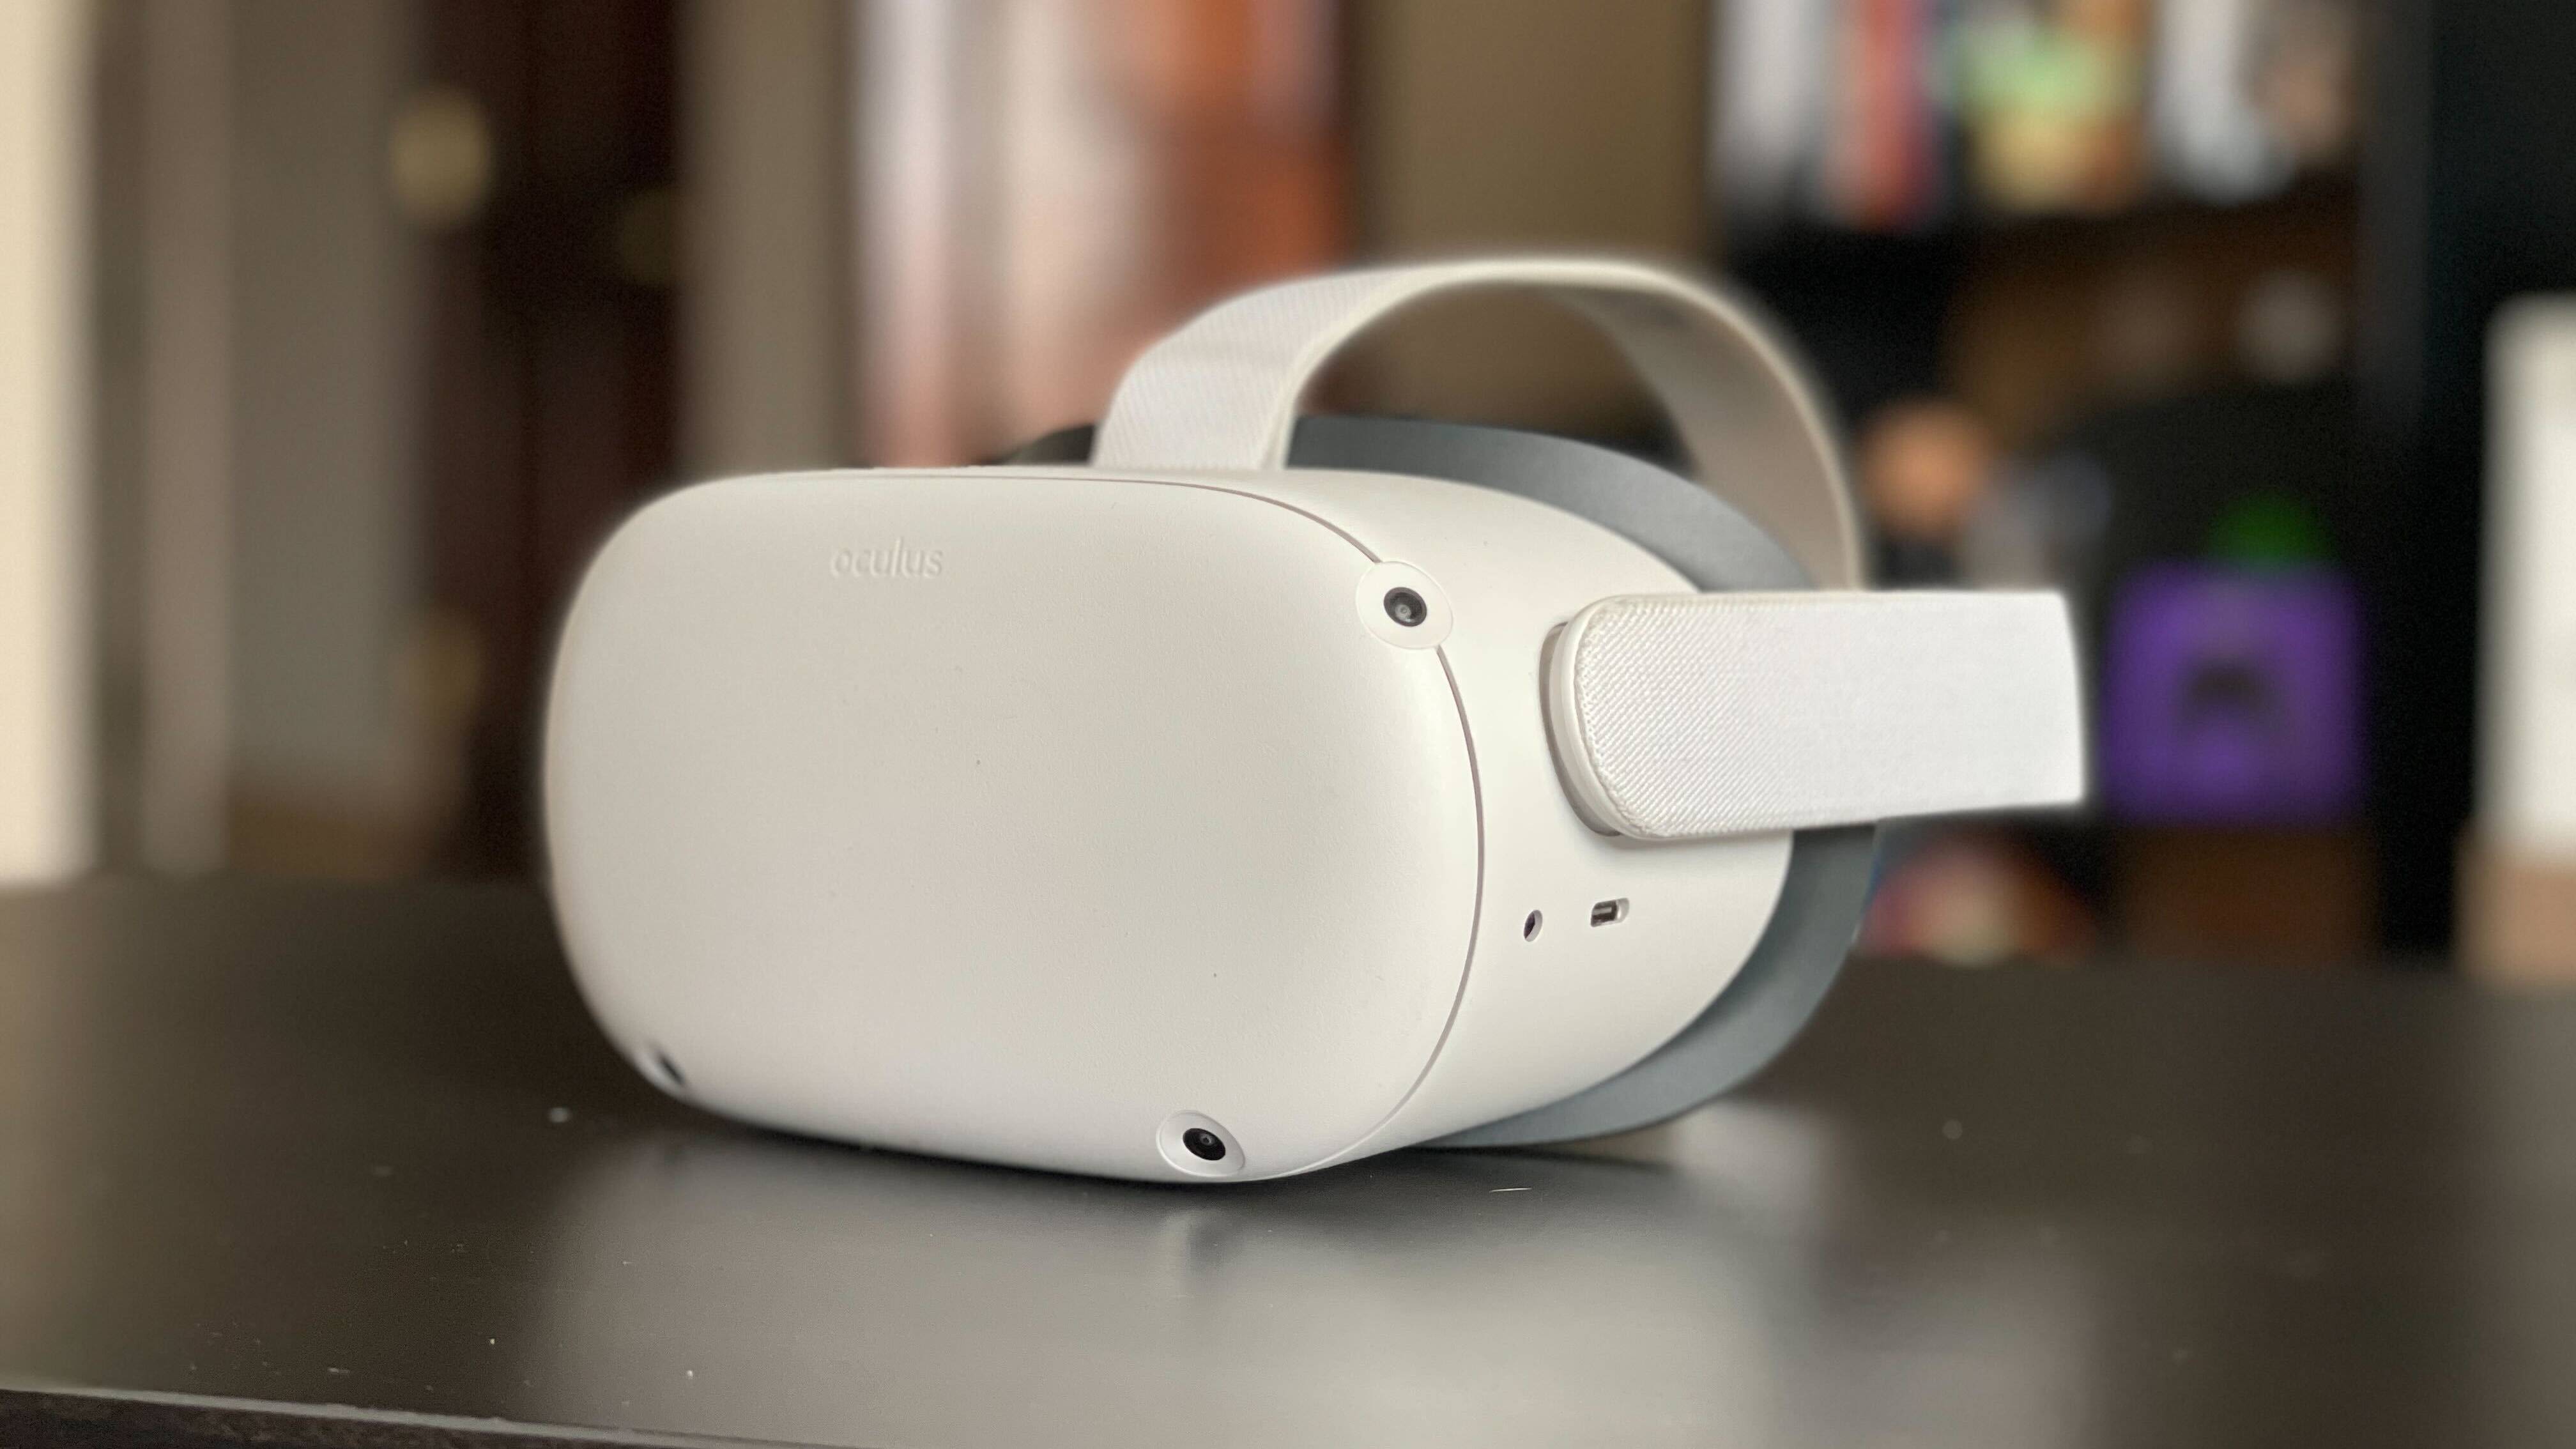 Oculus Quest 2: Price, Specs, and if it's Worth Buying - History-Computer